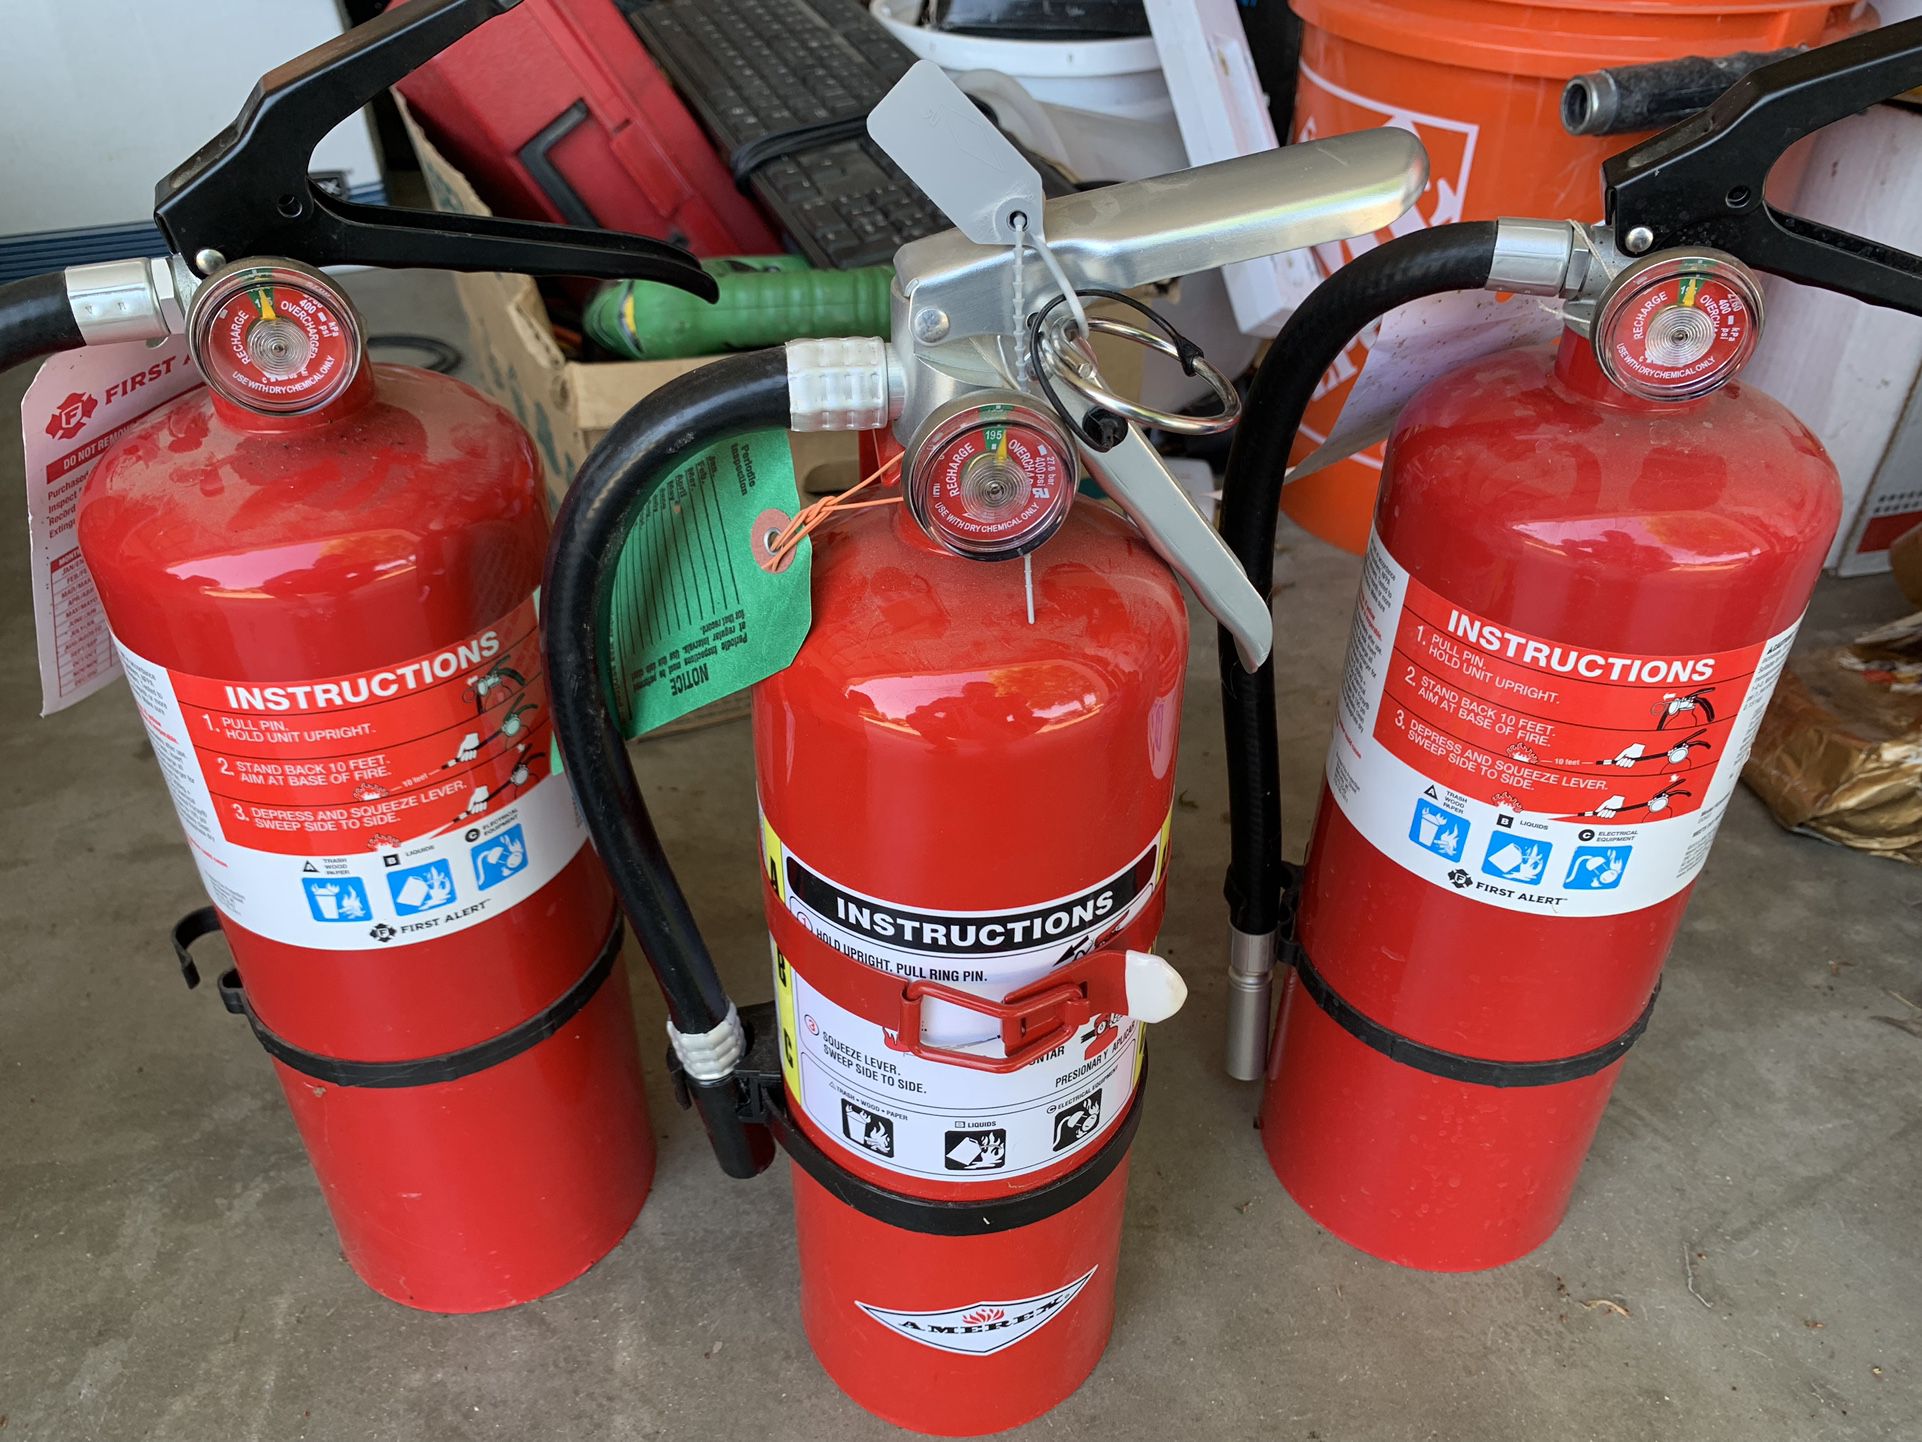 Fire Extinguishers $70  for 3, Obo.